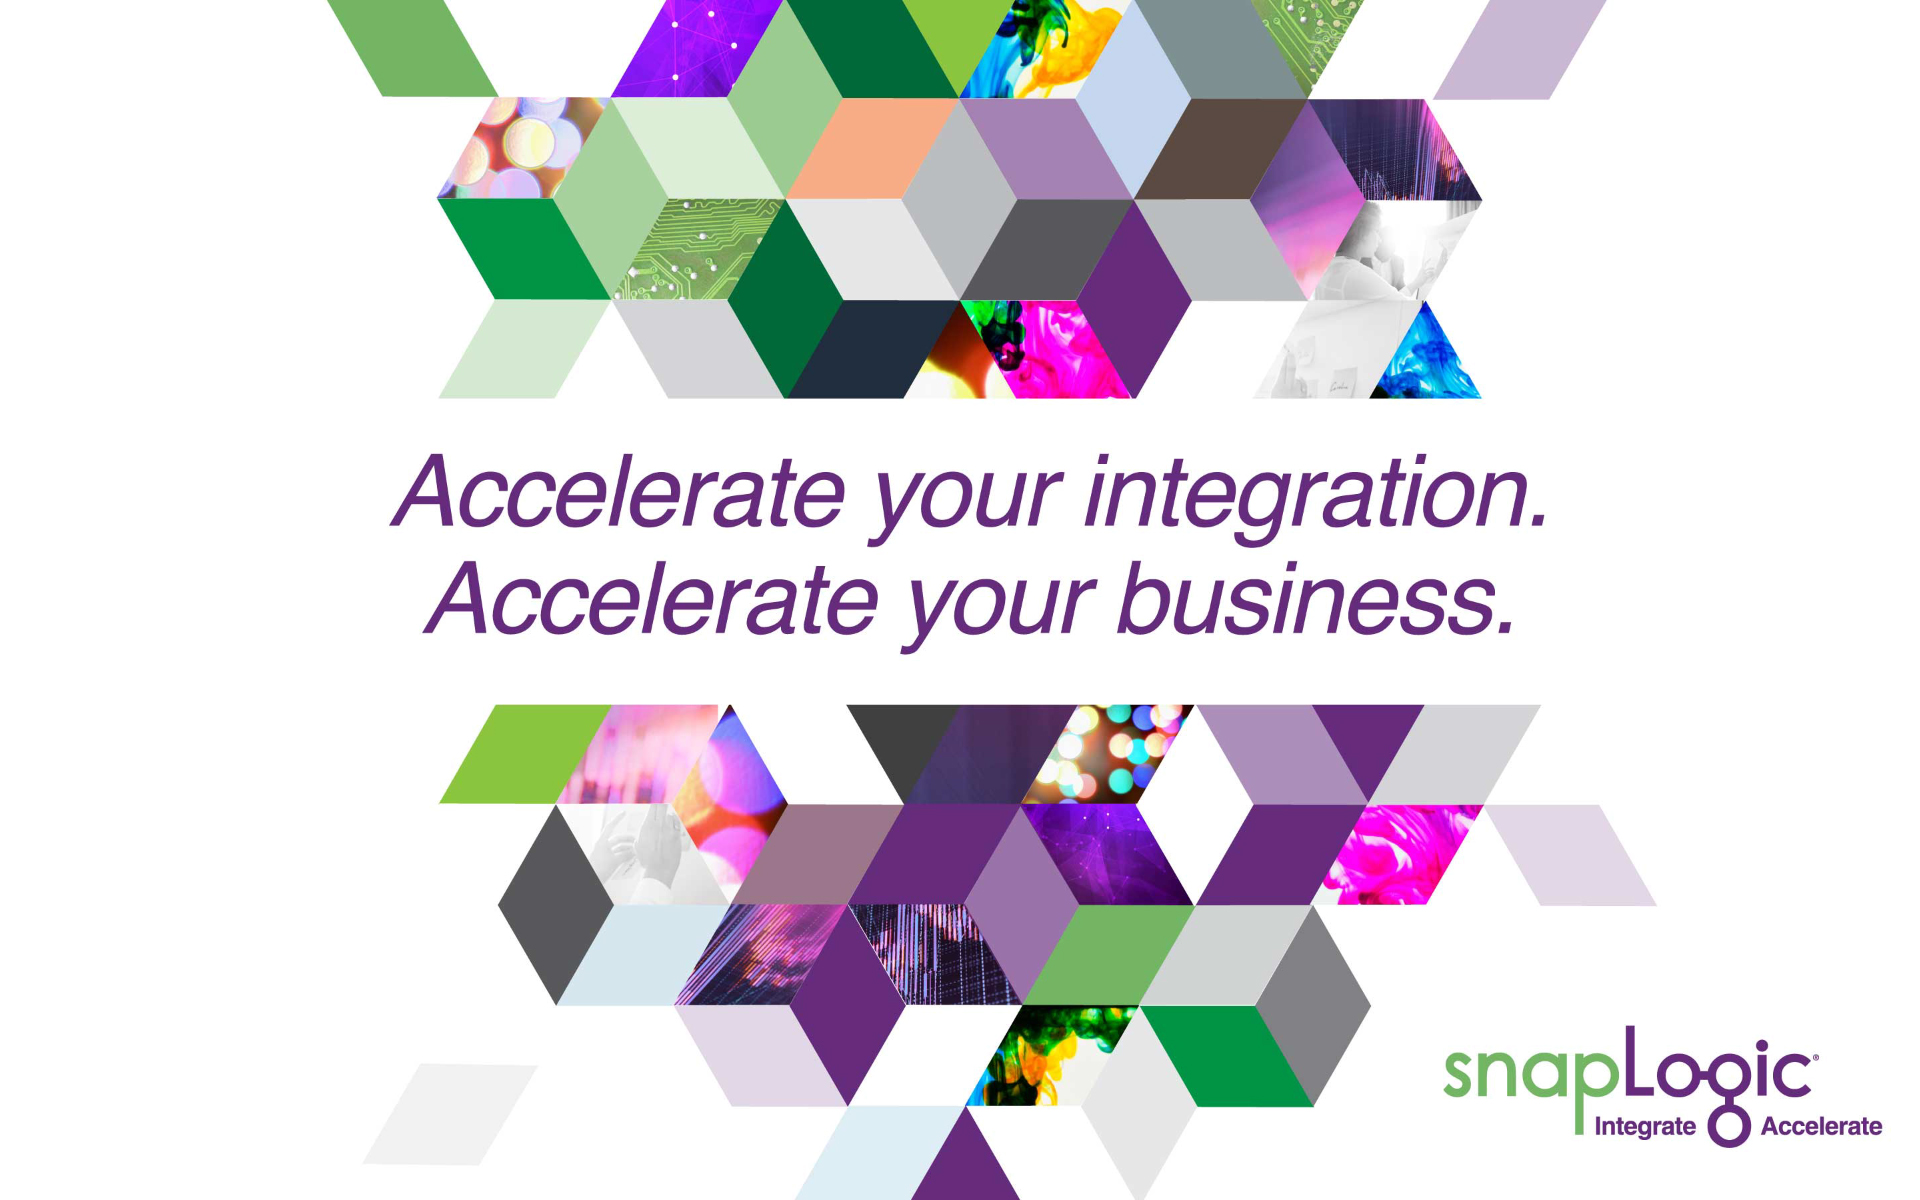 accelerate your integration, accelerate your business